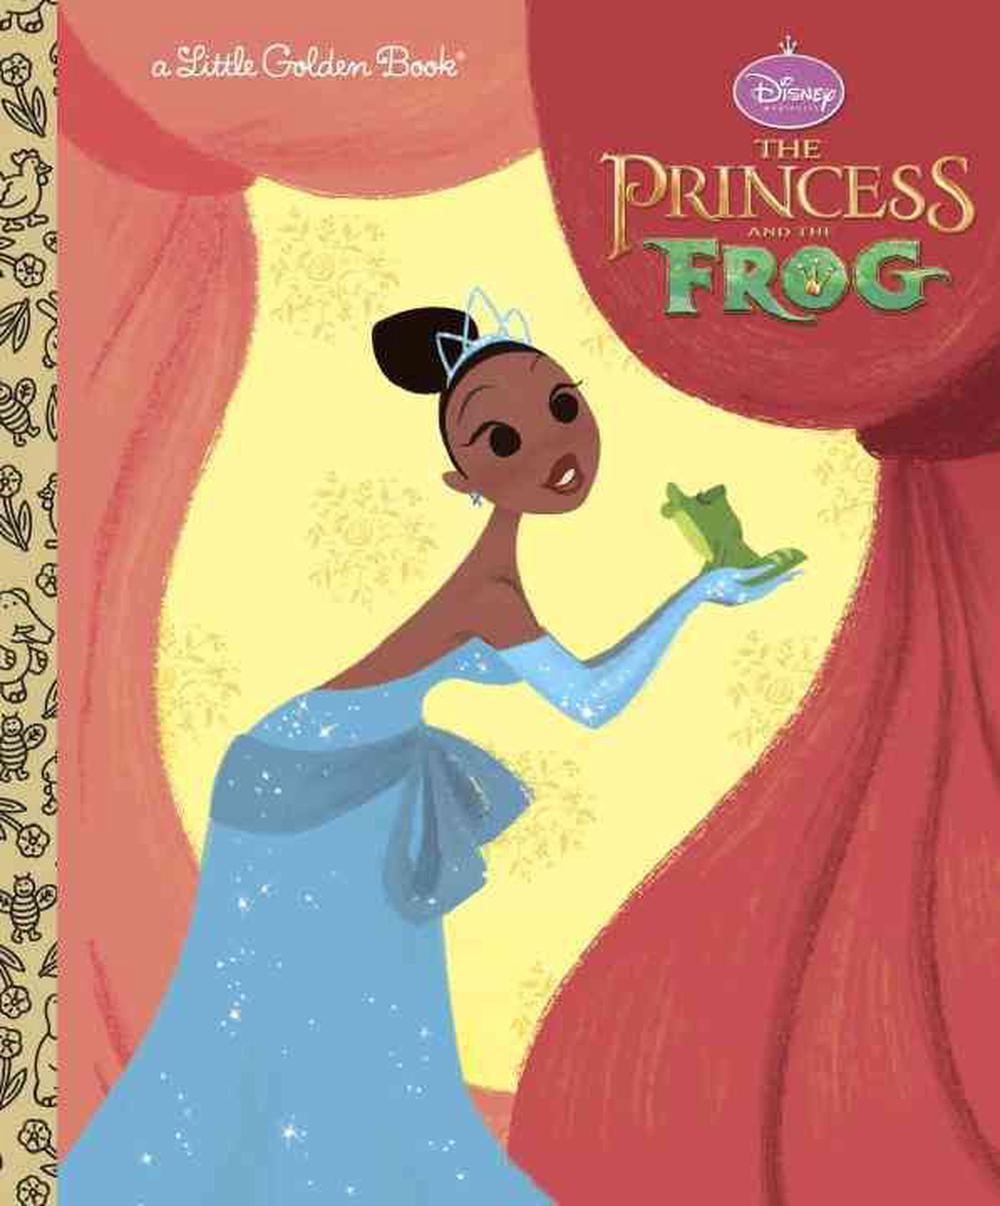 The Princess and the Frog Little Golden Book (Disney Princess and the Frog)  by Random House Disney, Hardcover, 9780736426282 | Buy online at The Nile